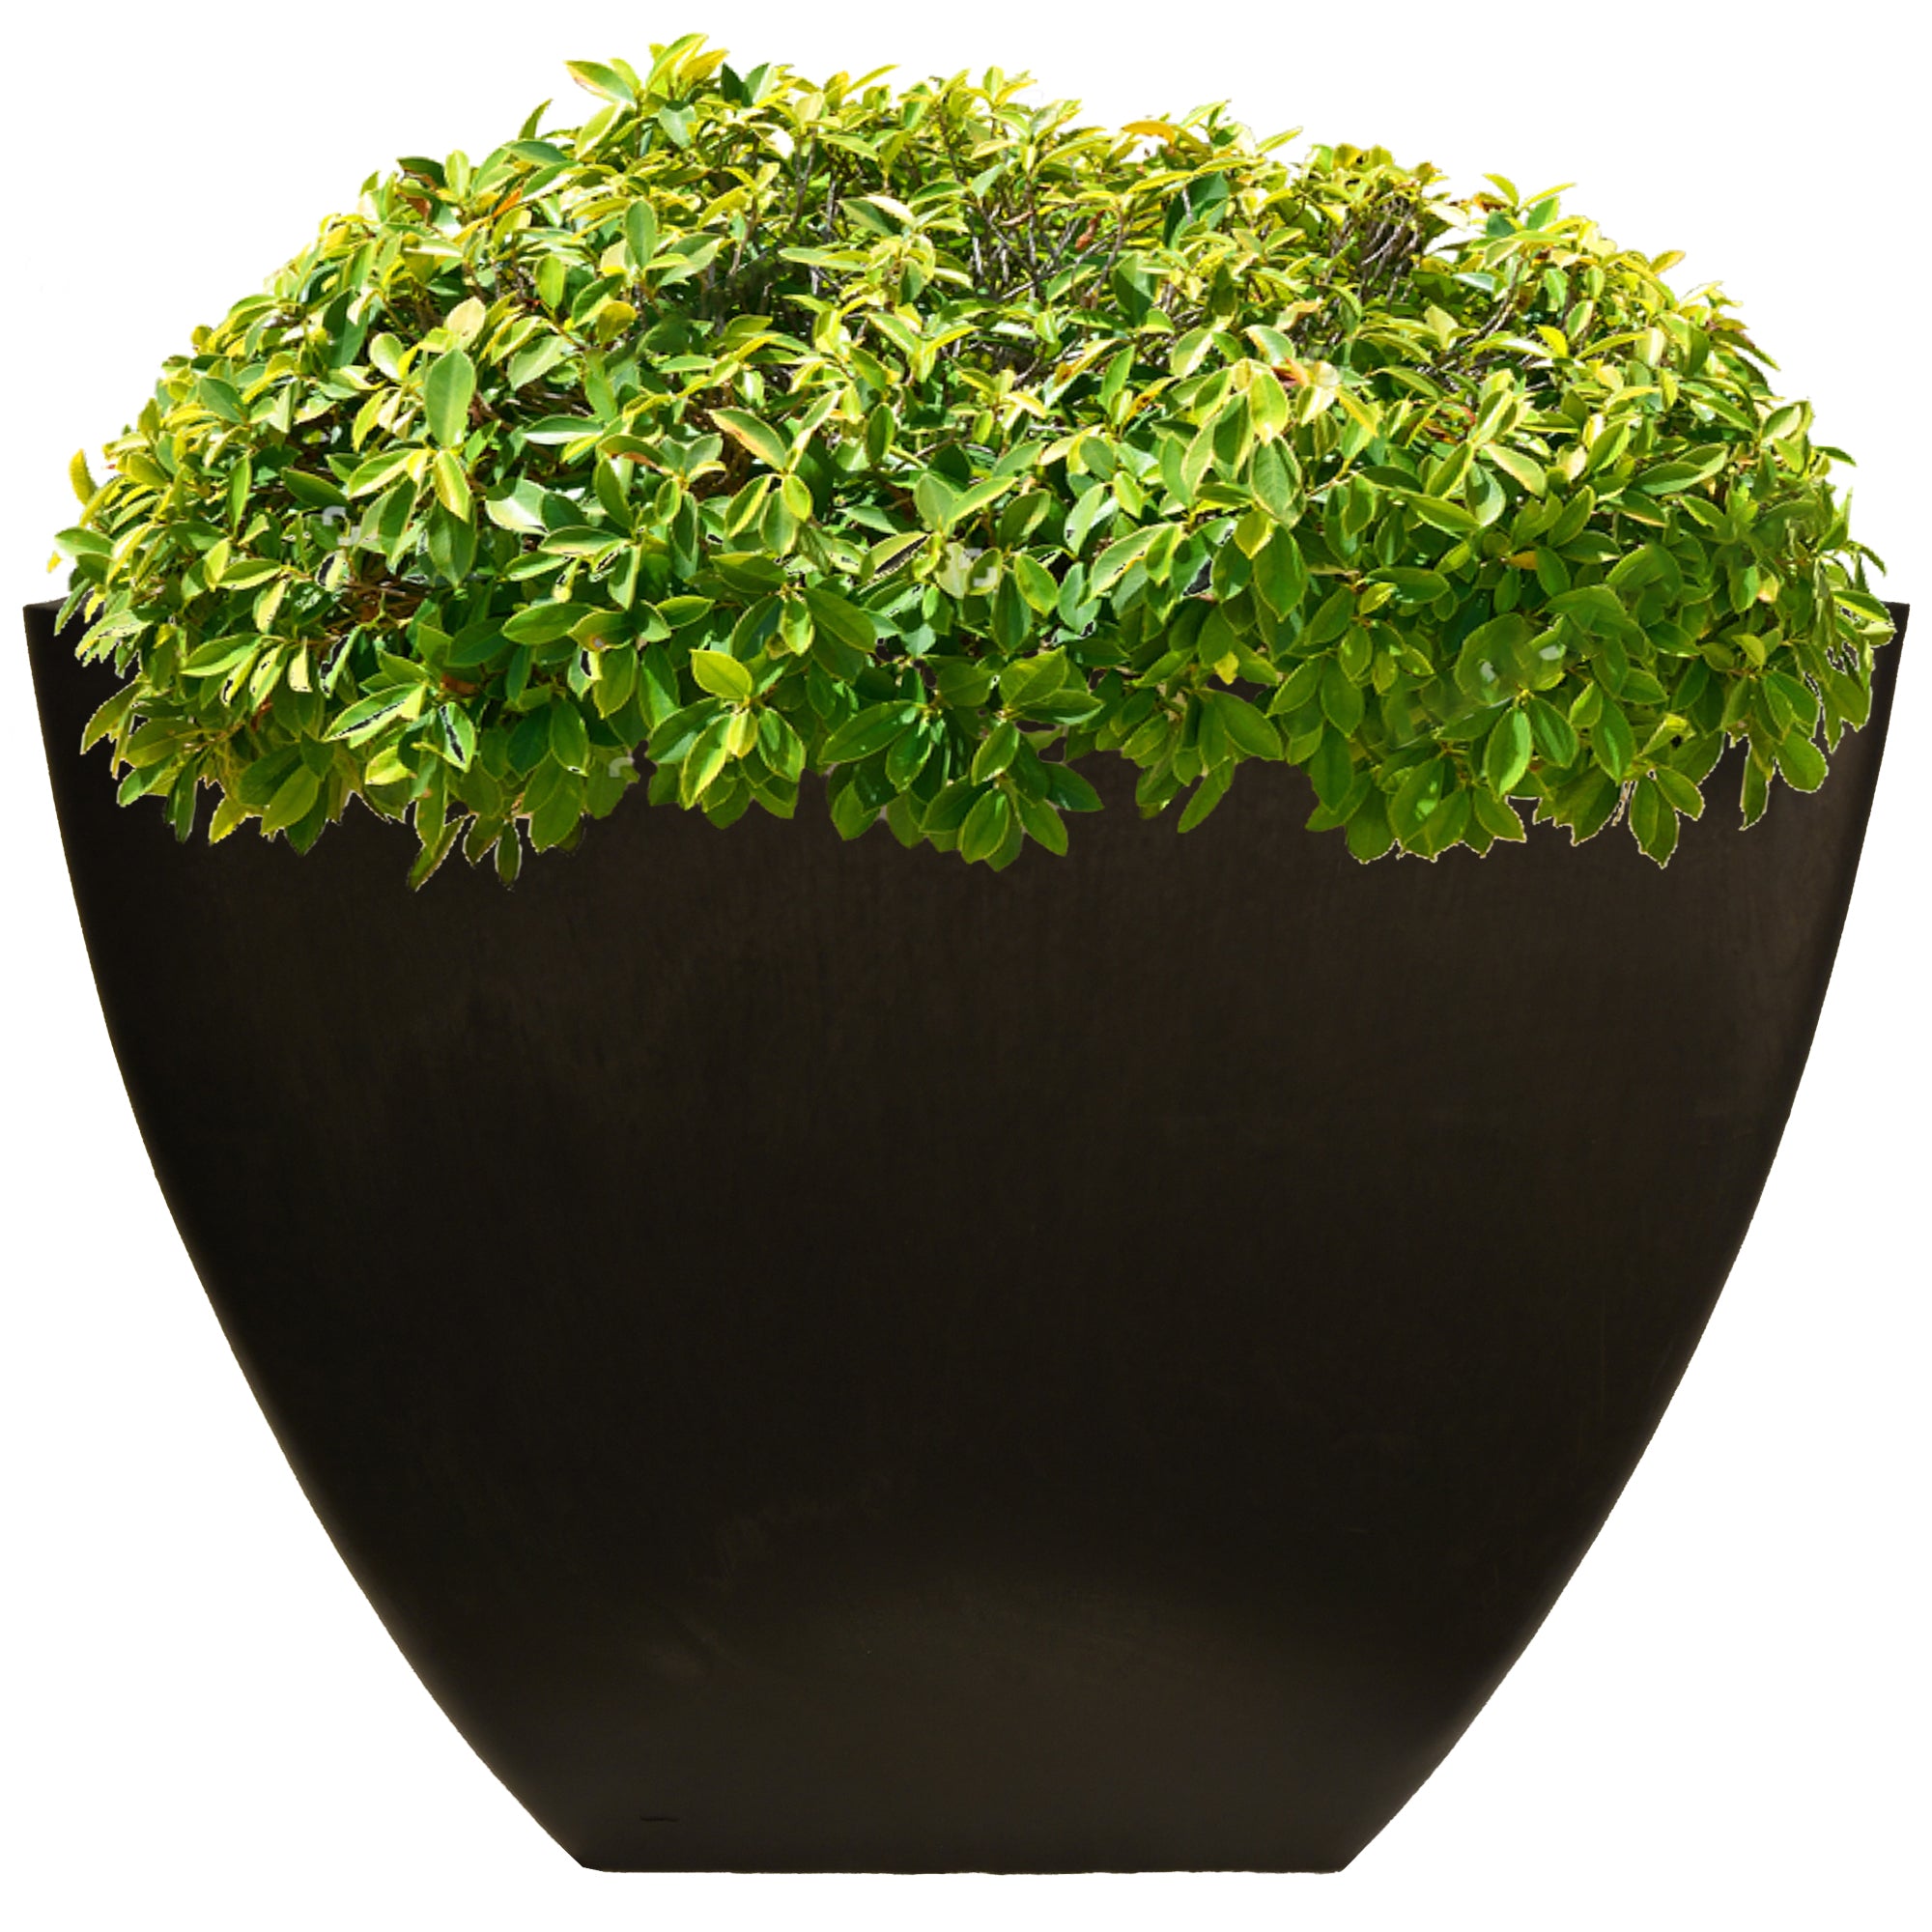 16 inch square planter in graphite with green plant inside on a white background